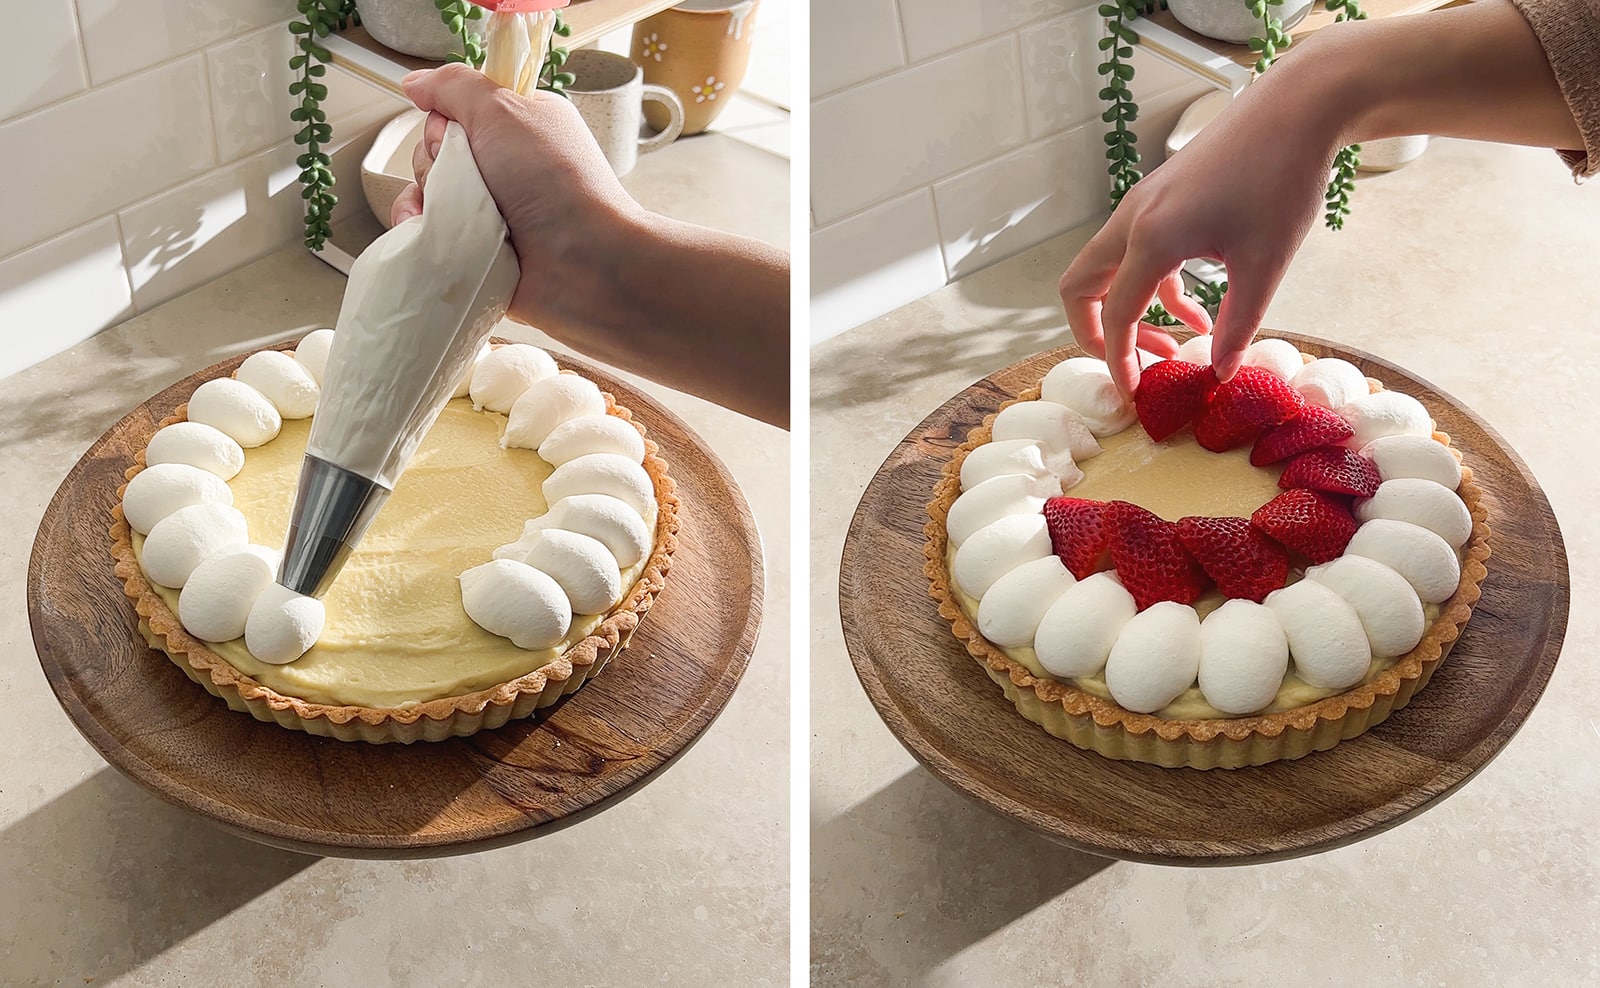 Left to right: piping dollops of whipped cream on top of tart, hand placing strawberries on top of tart.